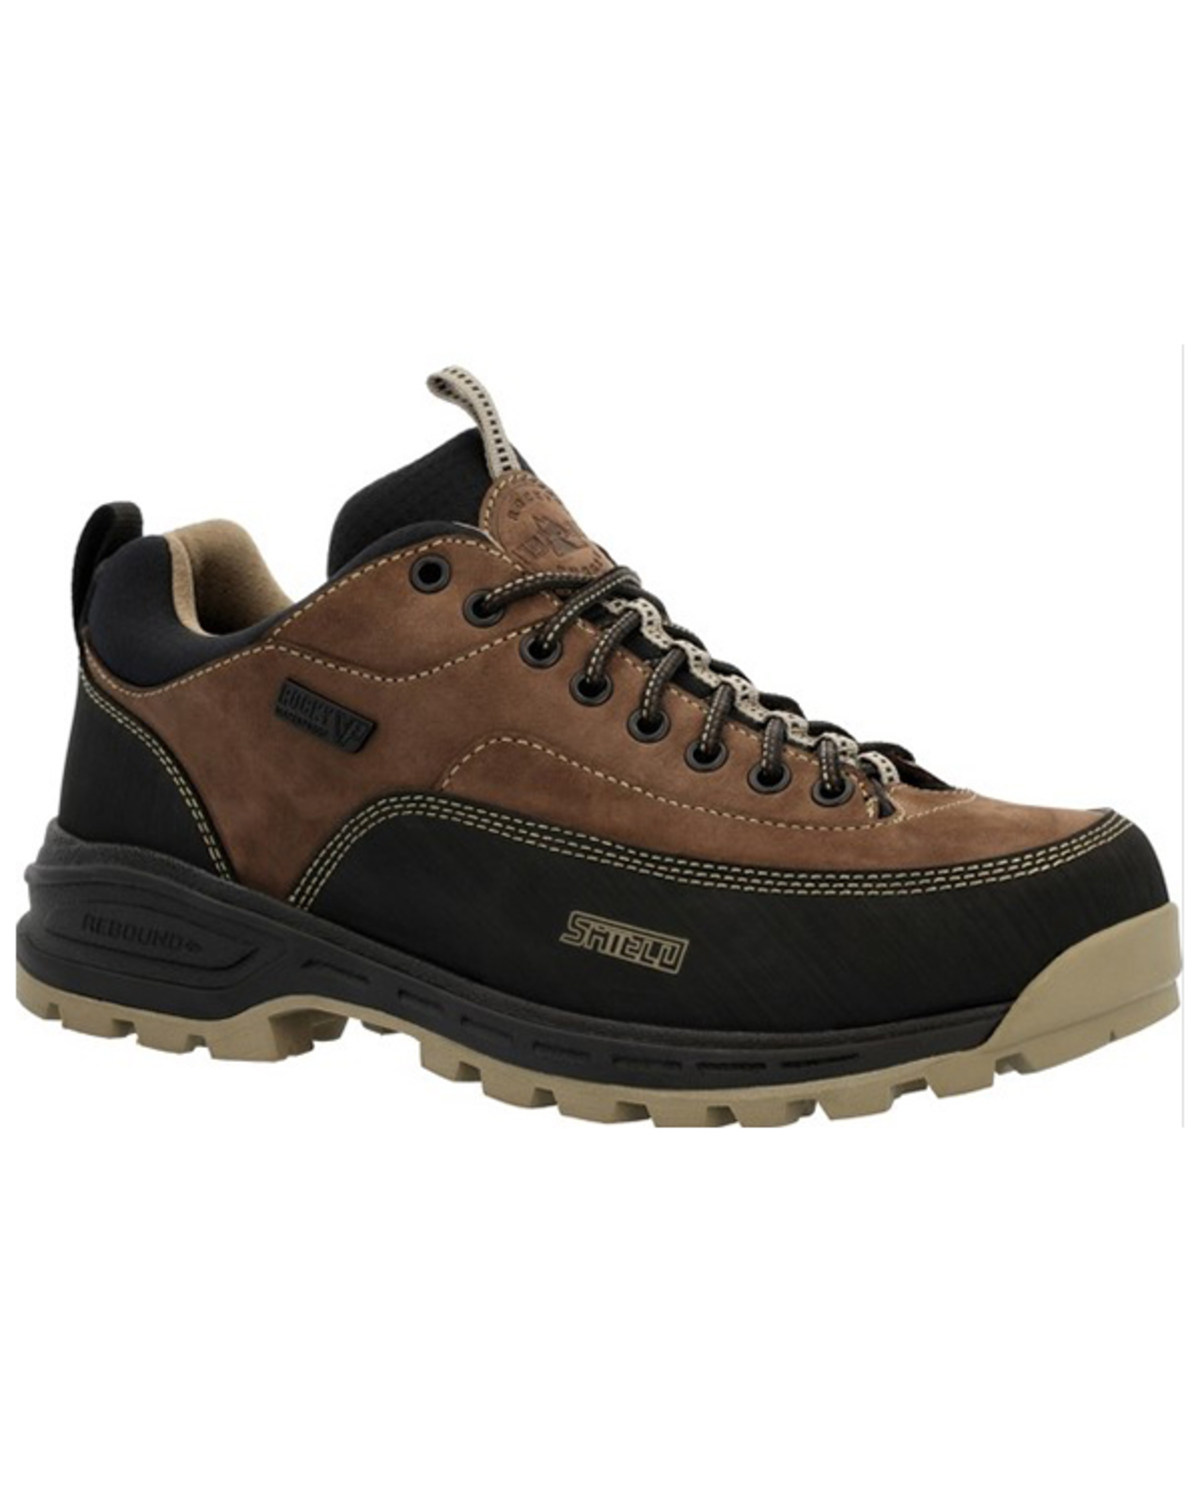 Rocky Men's Mountain Stalker Pro Waterproof Lace-Up Hiking Work Oxford Shoes - Round Toe